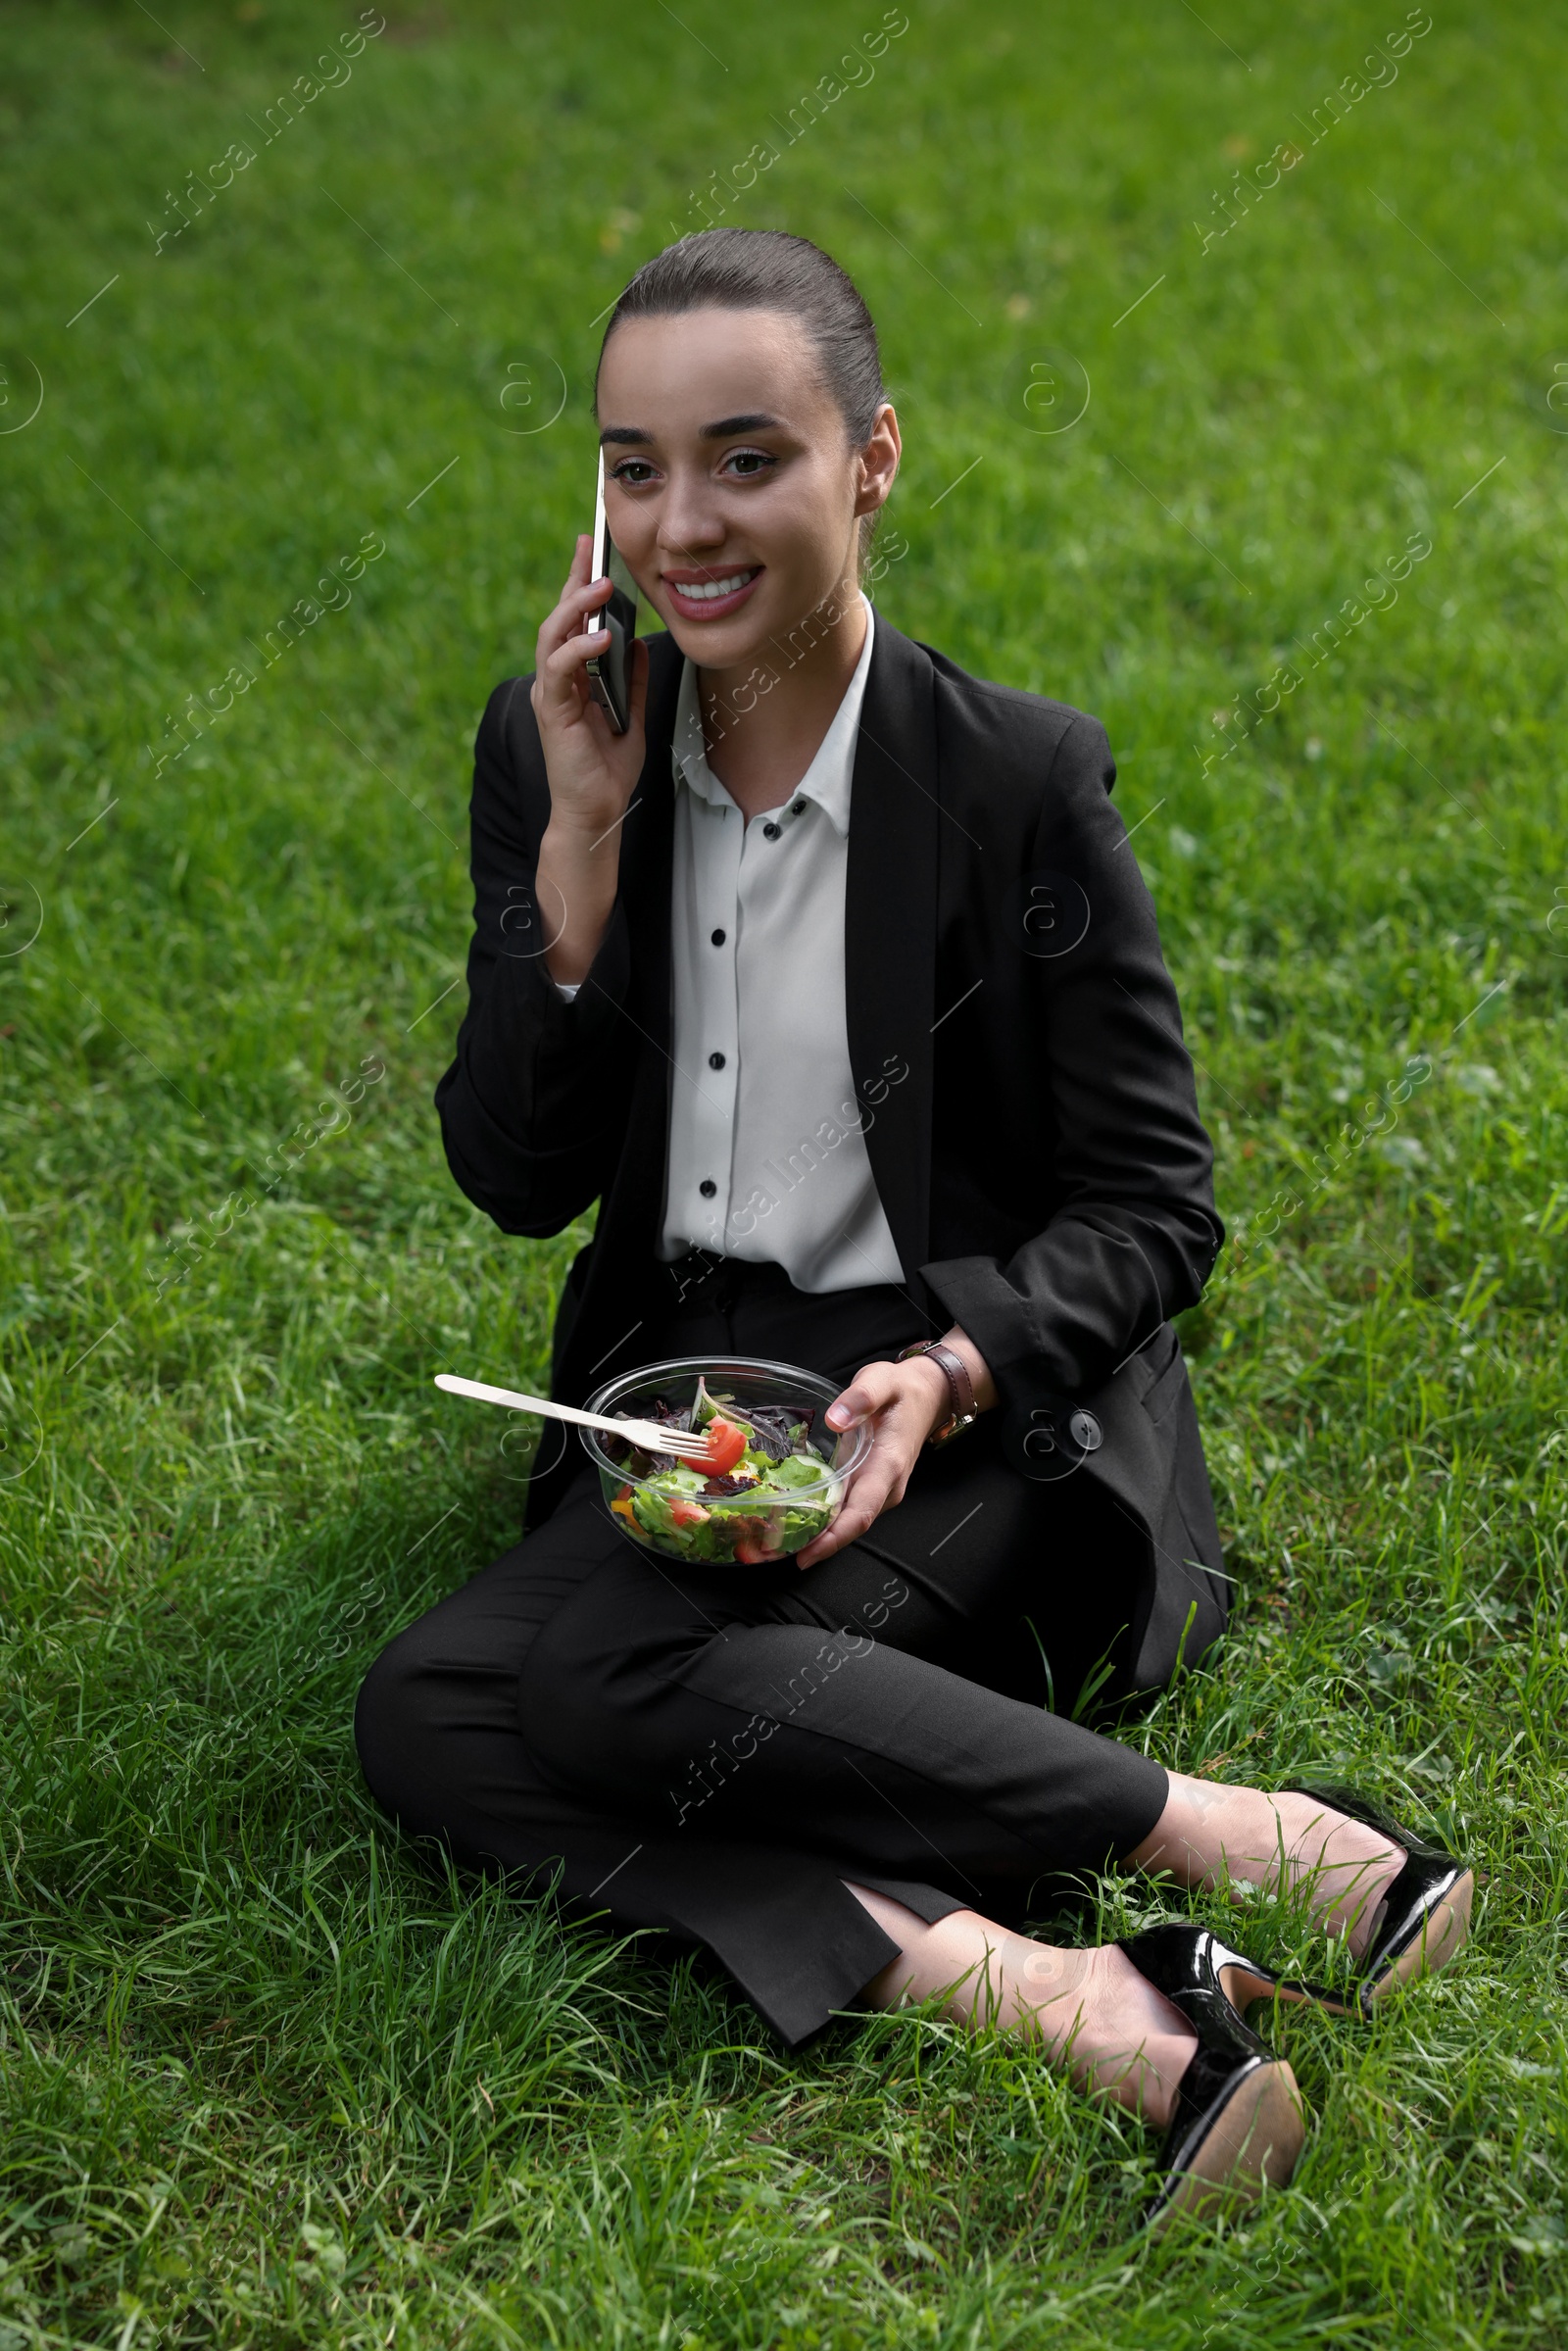 Photo of Lunch time. Happy businesswoman with container of salad talking on smartphone on green grass outdoors